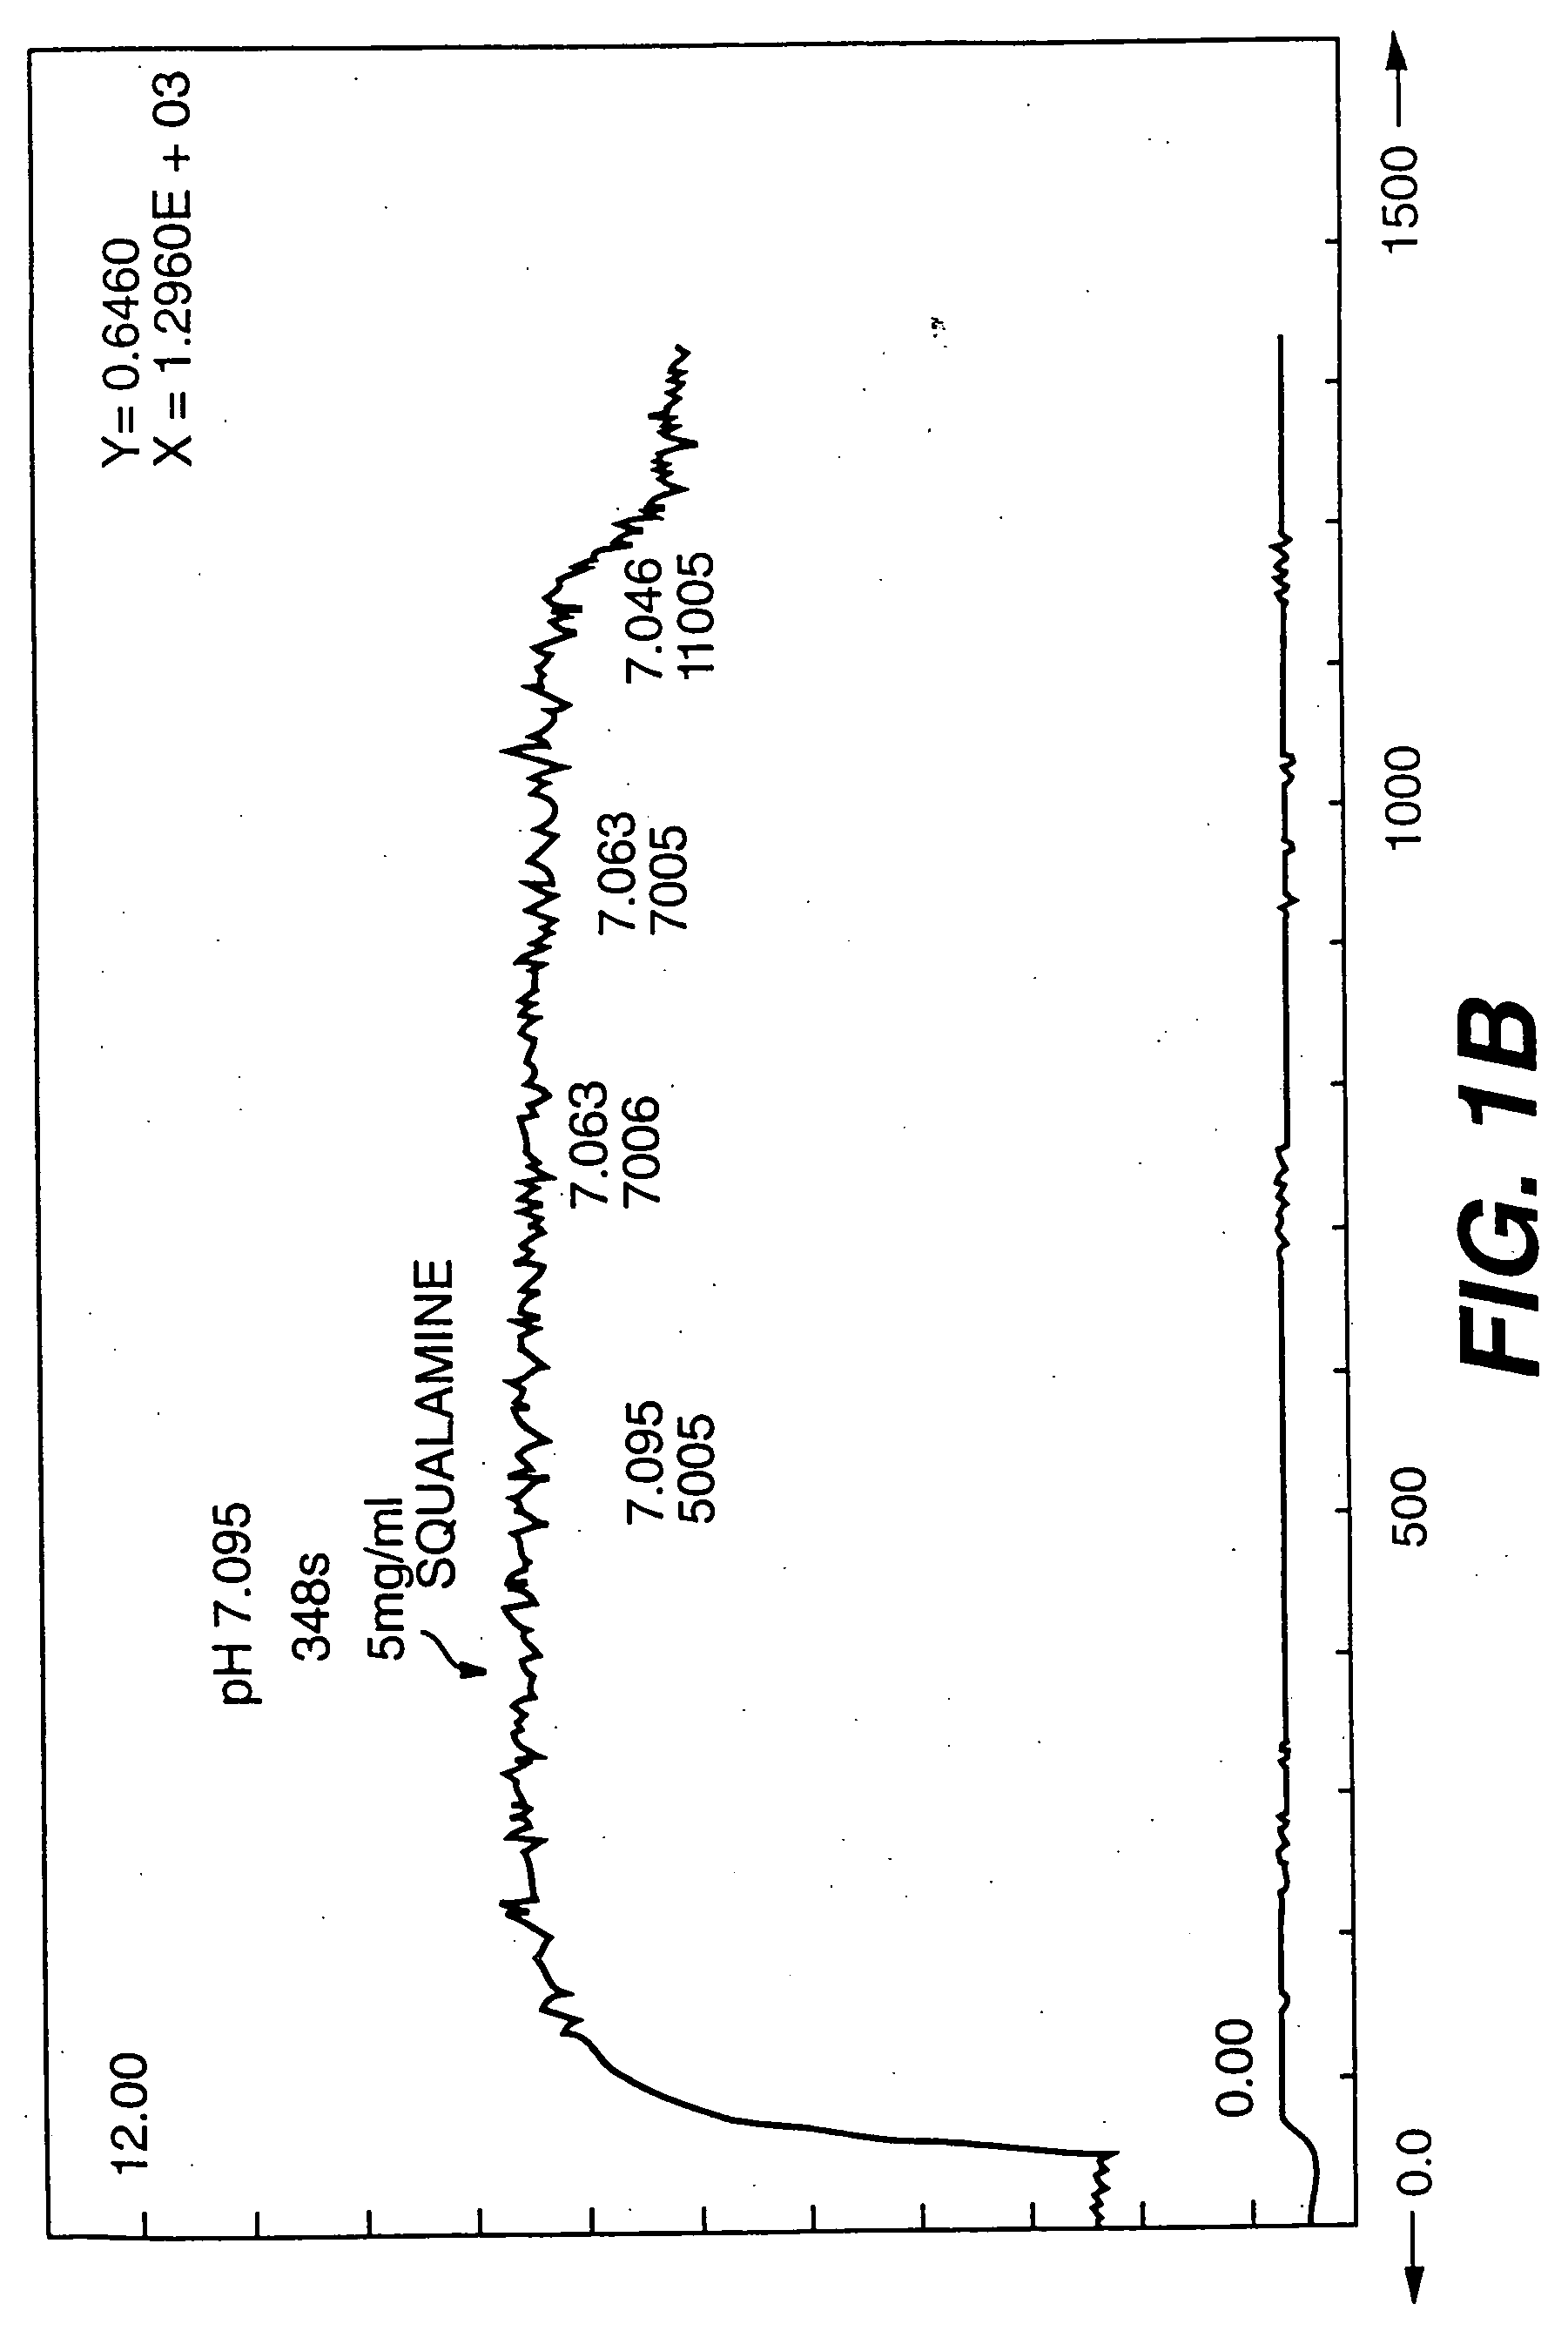 Aminosterol compounds useful as inhibitors of the sodium/proton exchanger (NHE), pharmaceutical methods and compositions employing such inhibitors, and processes for evaluating the NHE-inhibitory efficacy of compounds